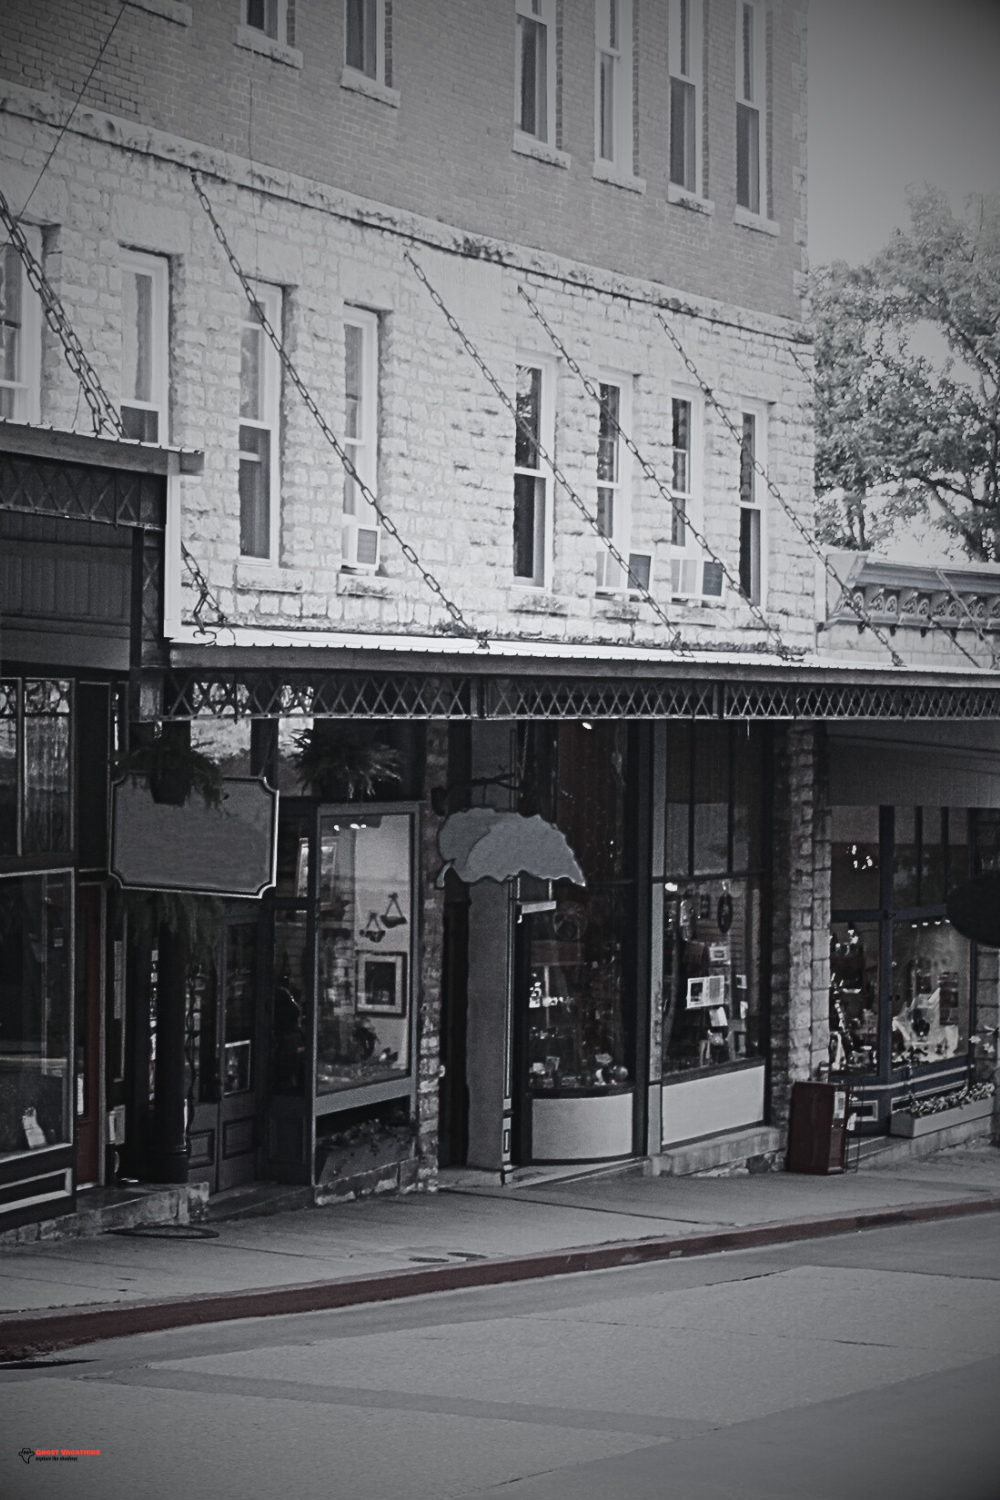 renowned Eureka Springs haunted hotels add to its historic allure.